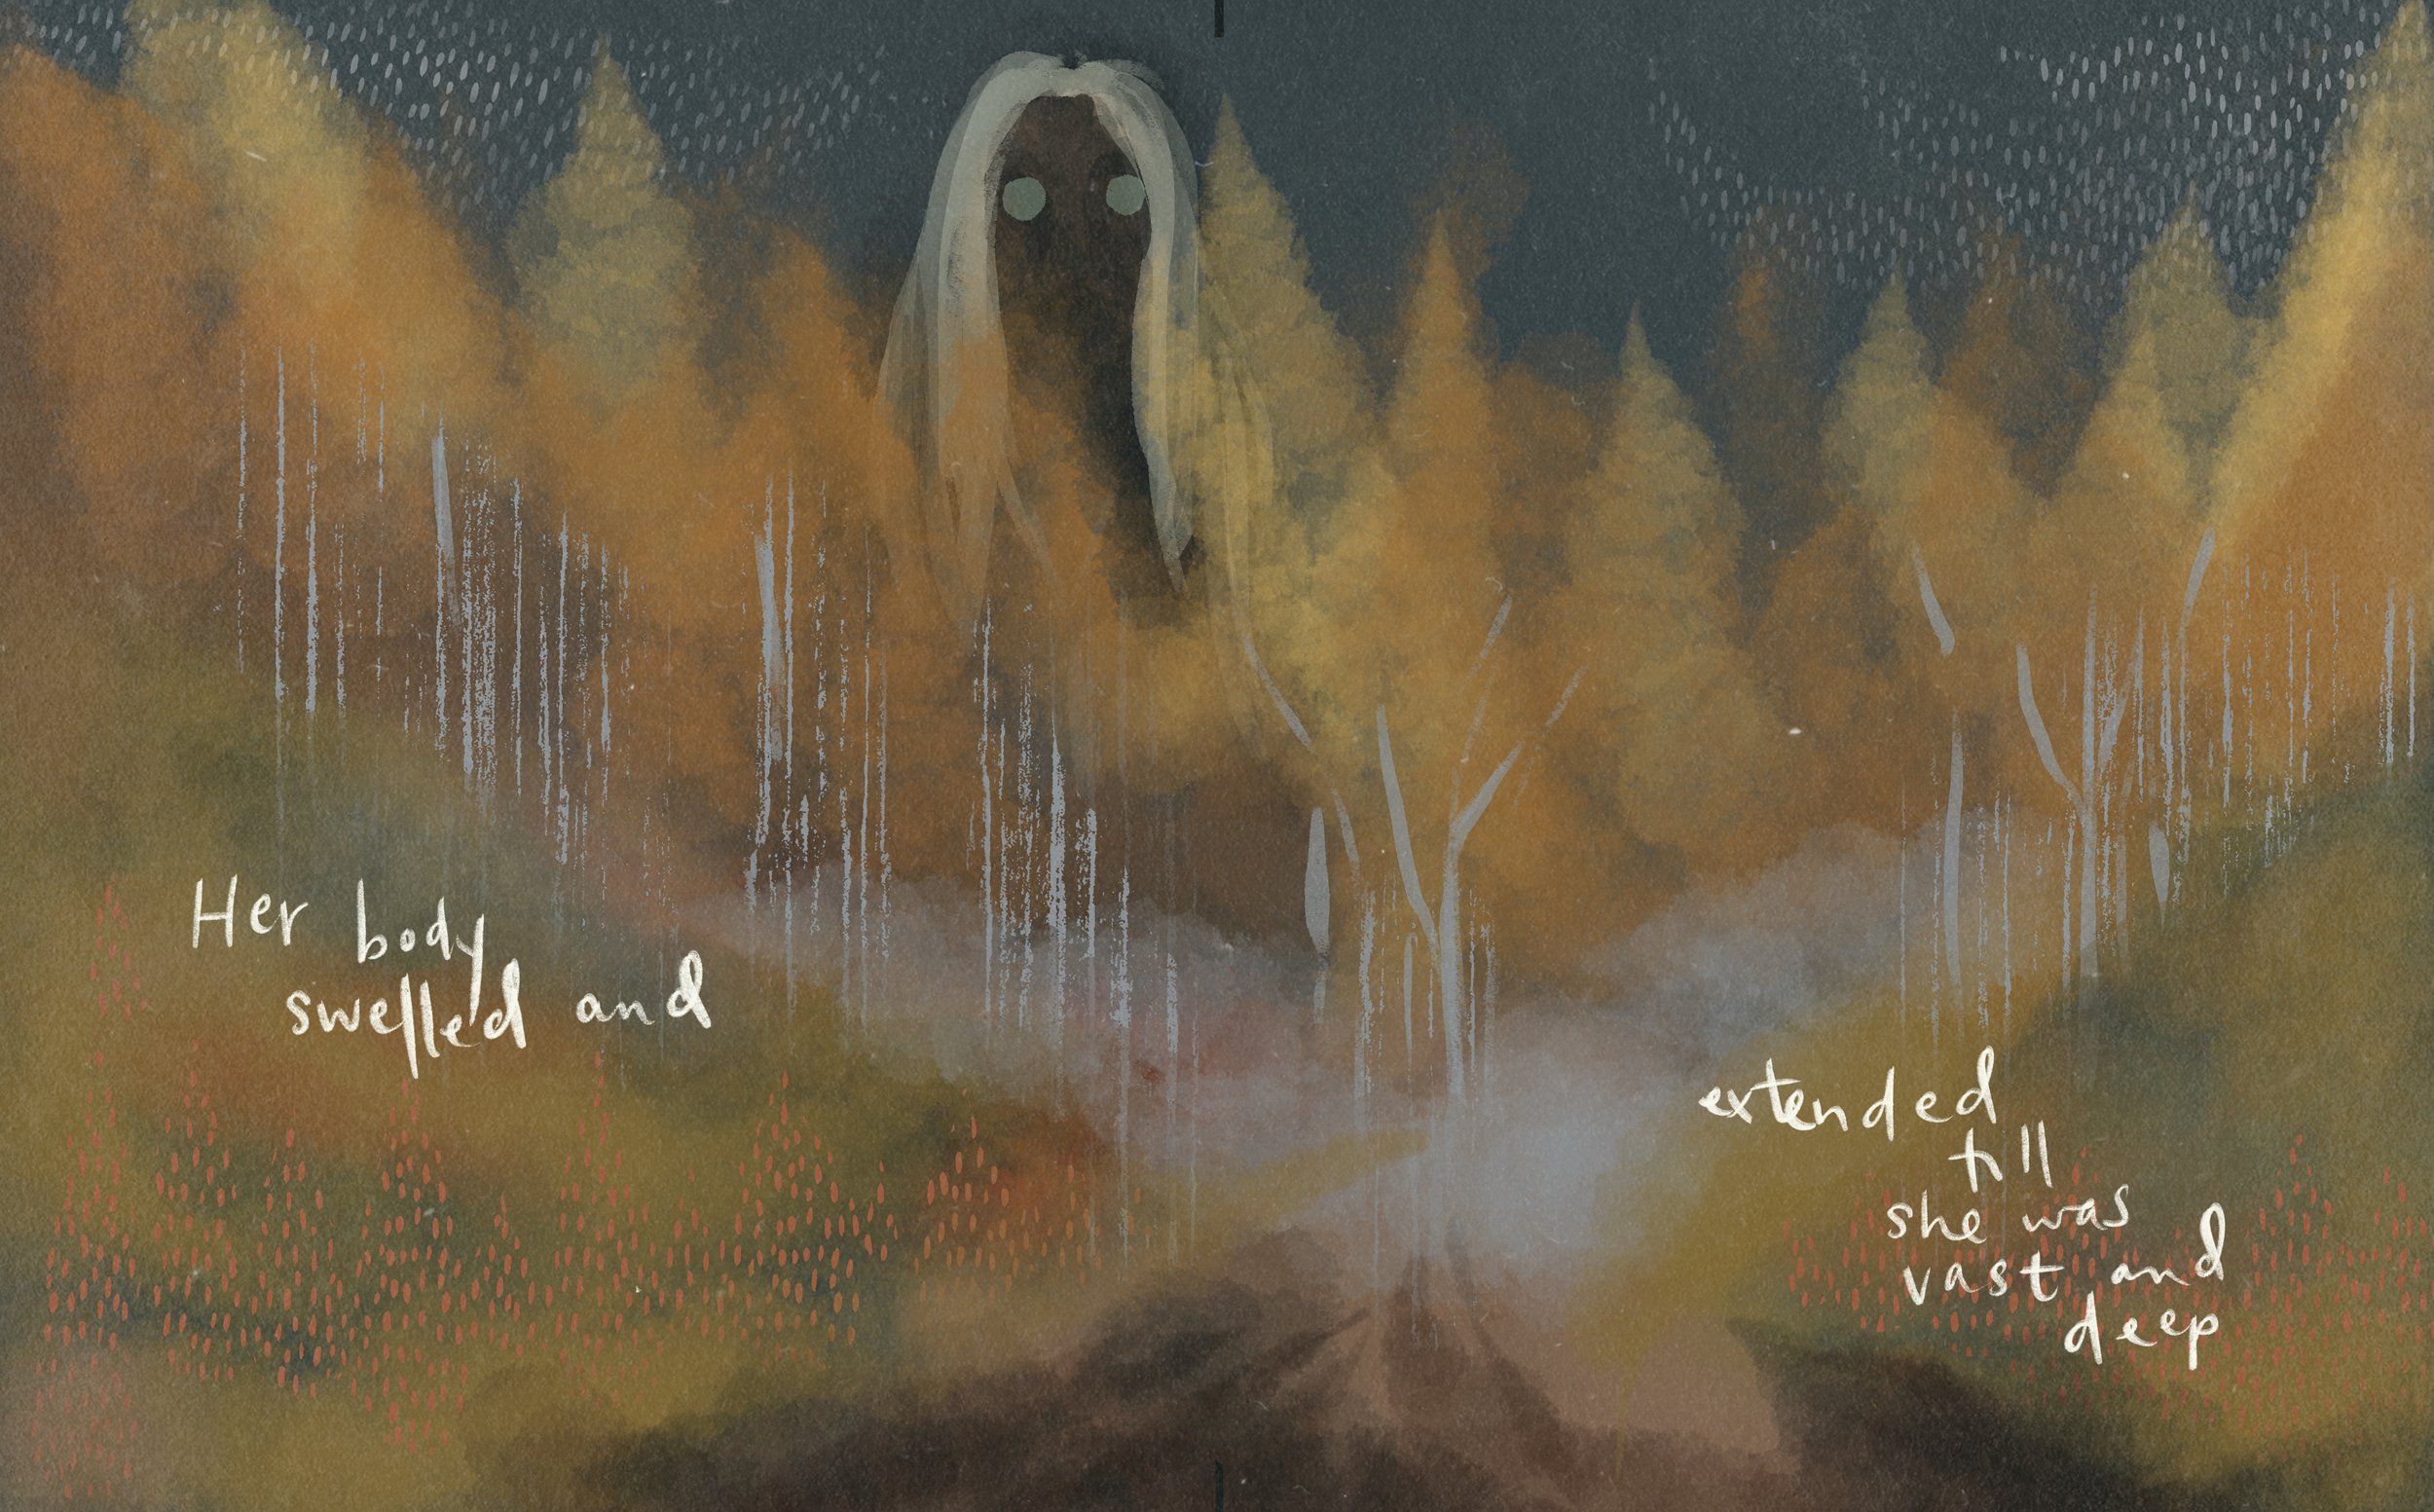 A painting of a fall forest with a ghostly image of a woman merging with the background. The words on the page say "Her body swelled  and extended 'till she was vast and deep. 